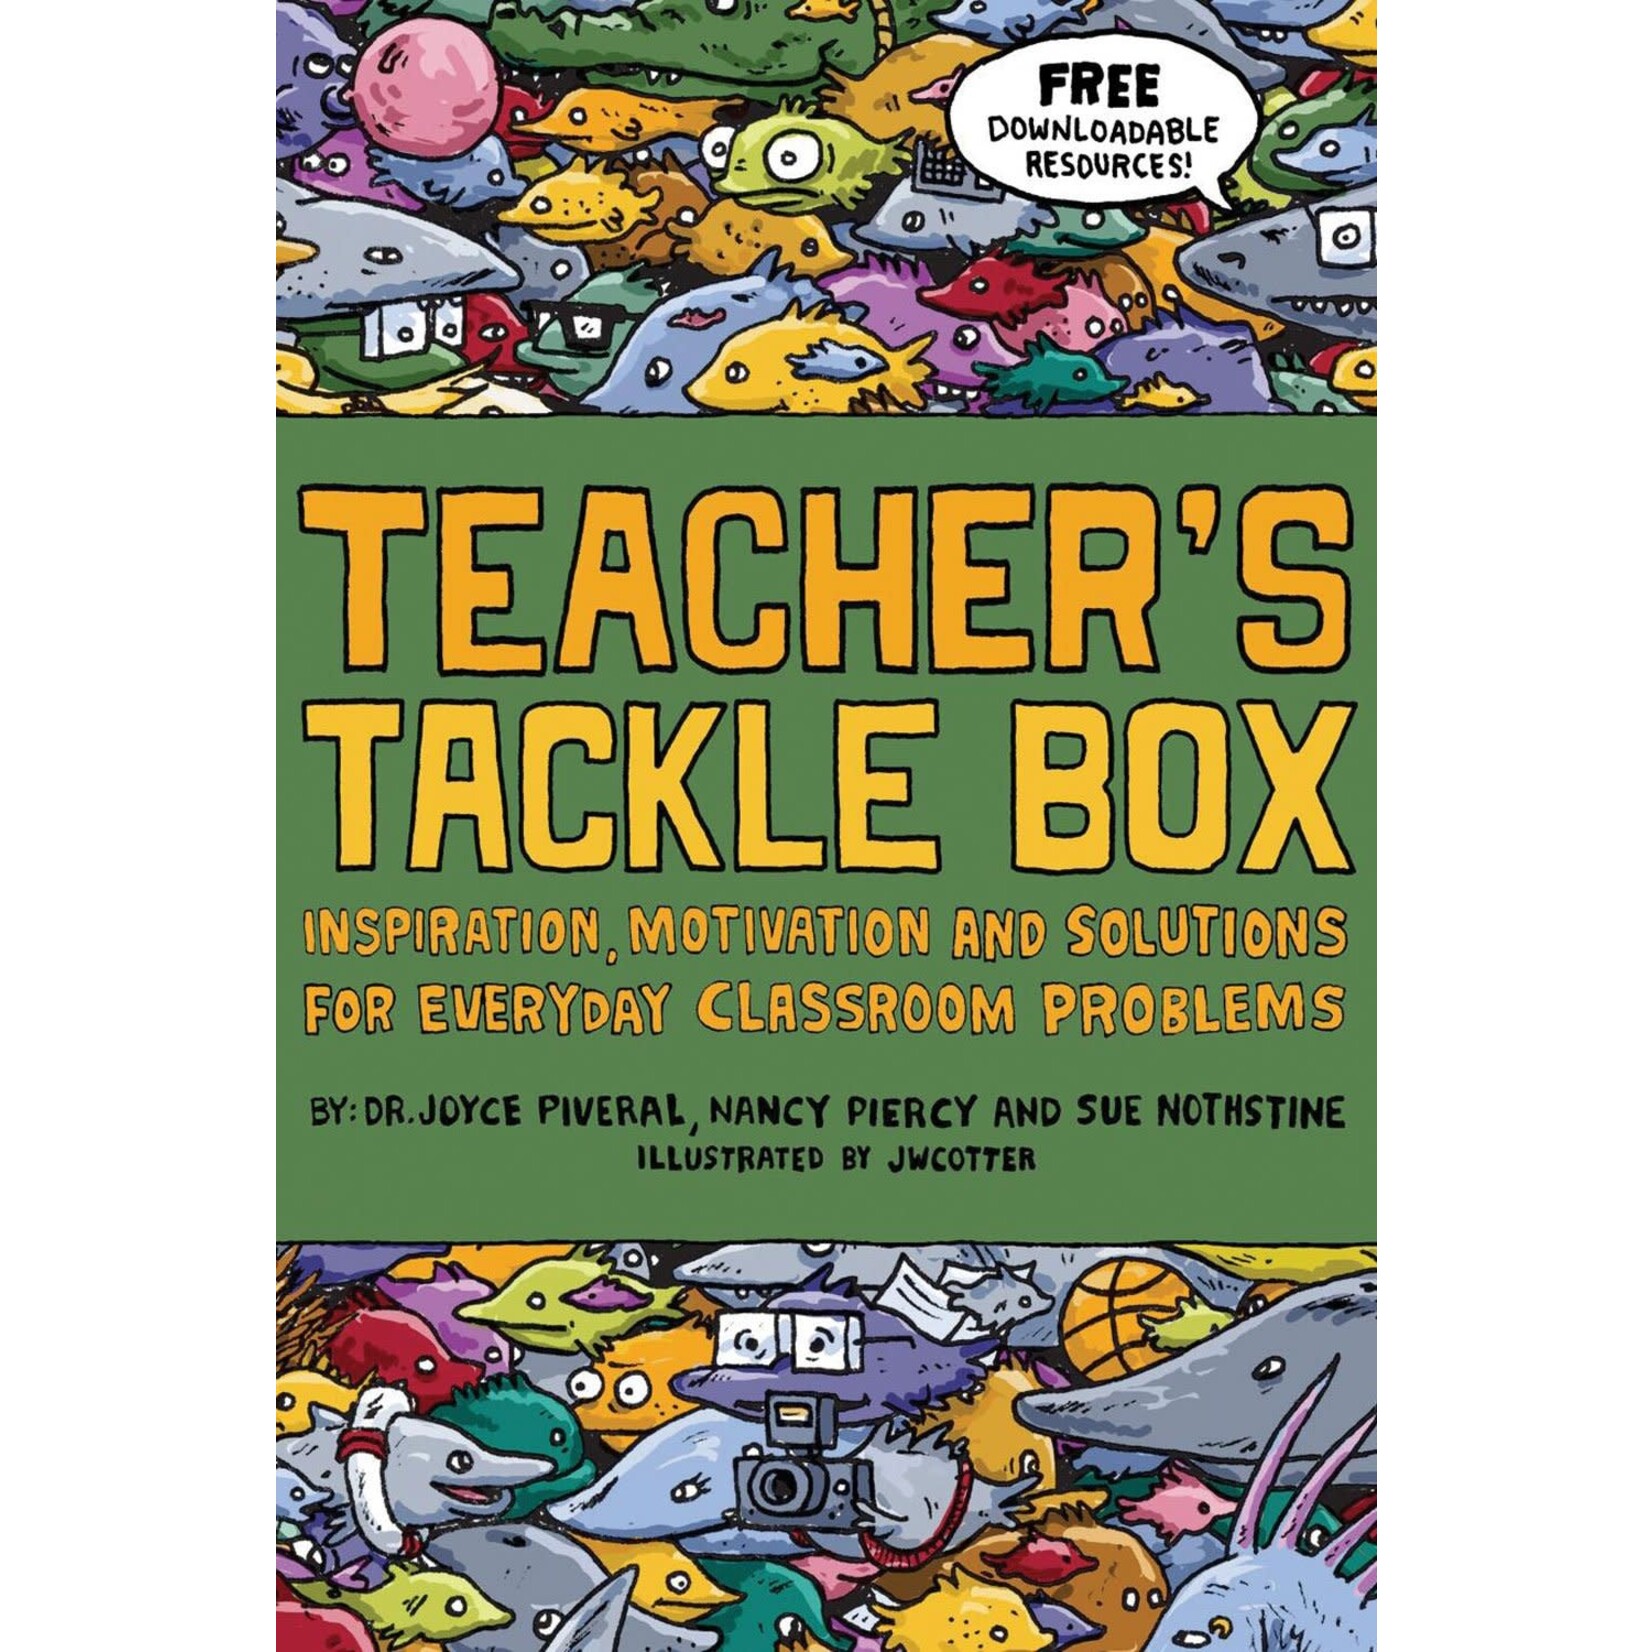 Teacher's Tackle Box: Inspiration, Motivation and Solutions for Everyday Classroom Problems